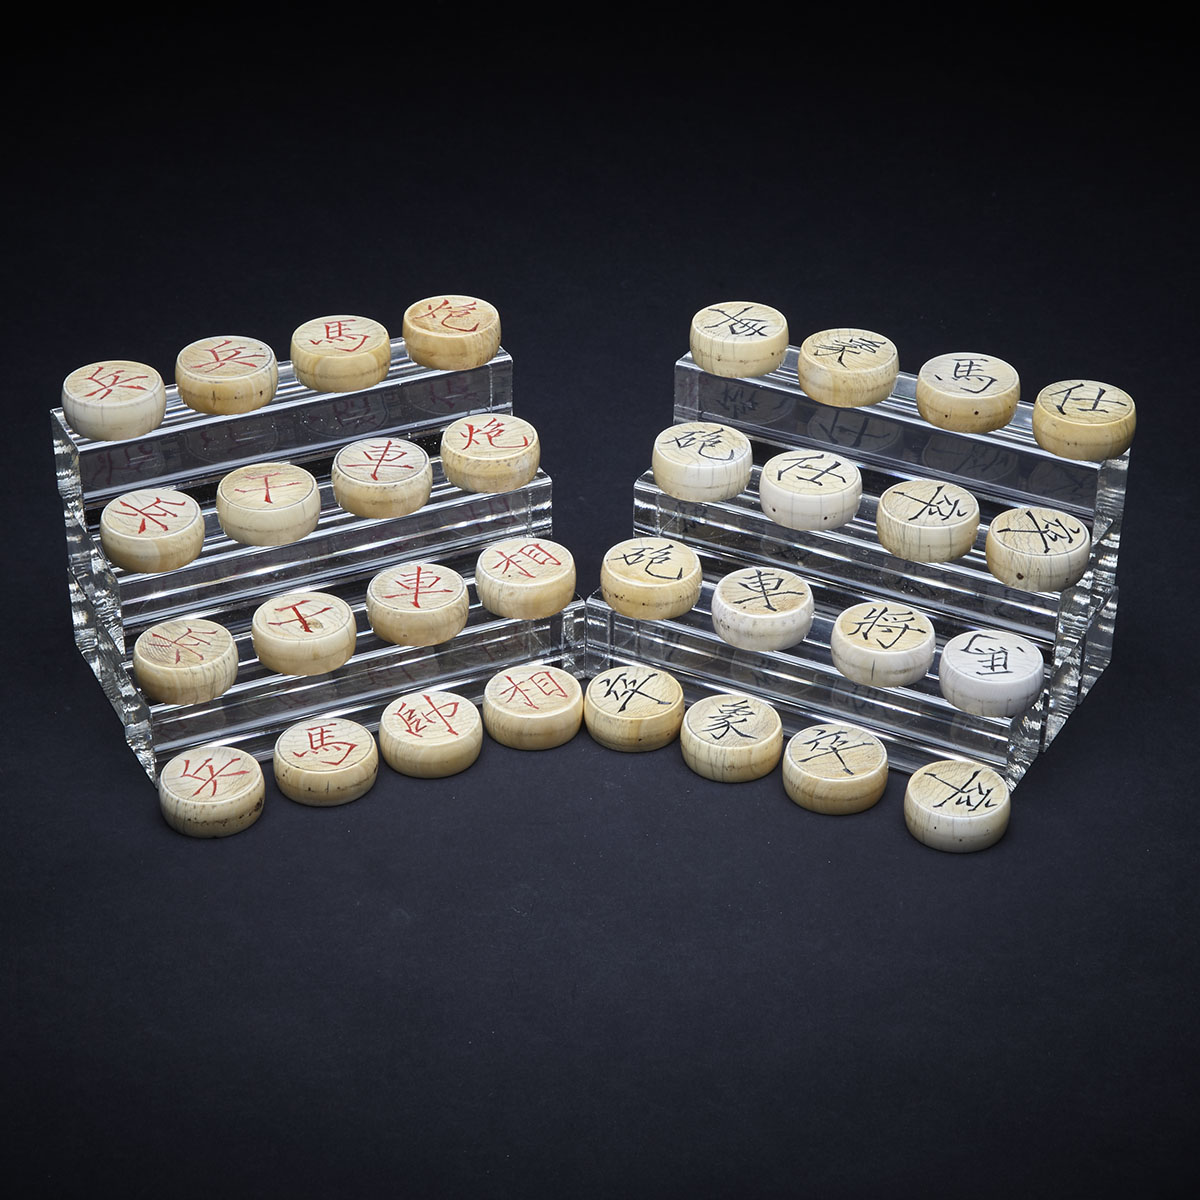 Set of Traditional Chinese Ivory Xiangqi Chess Counters, 19th century